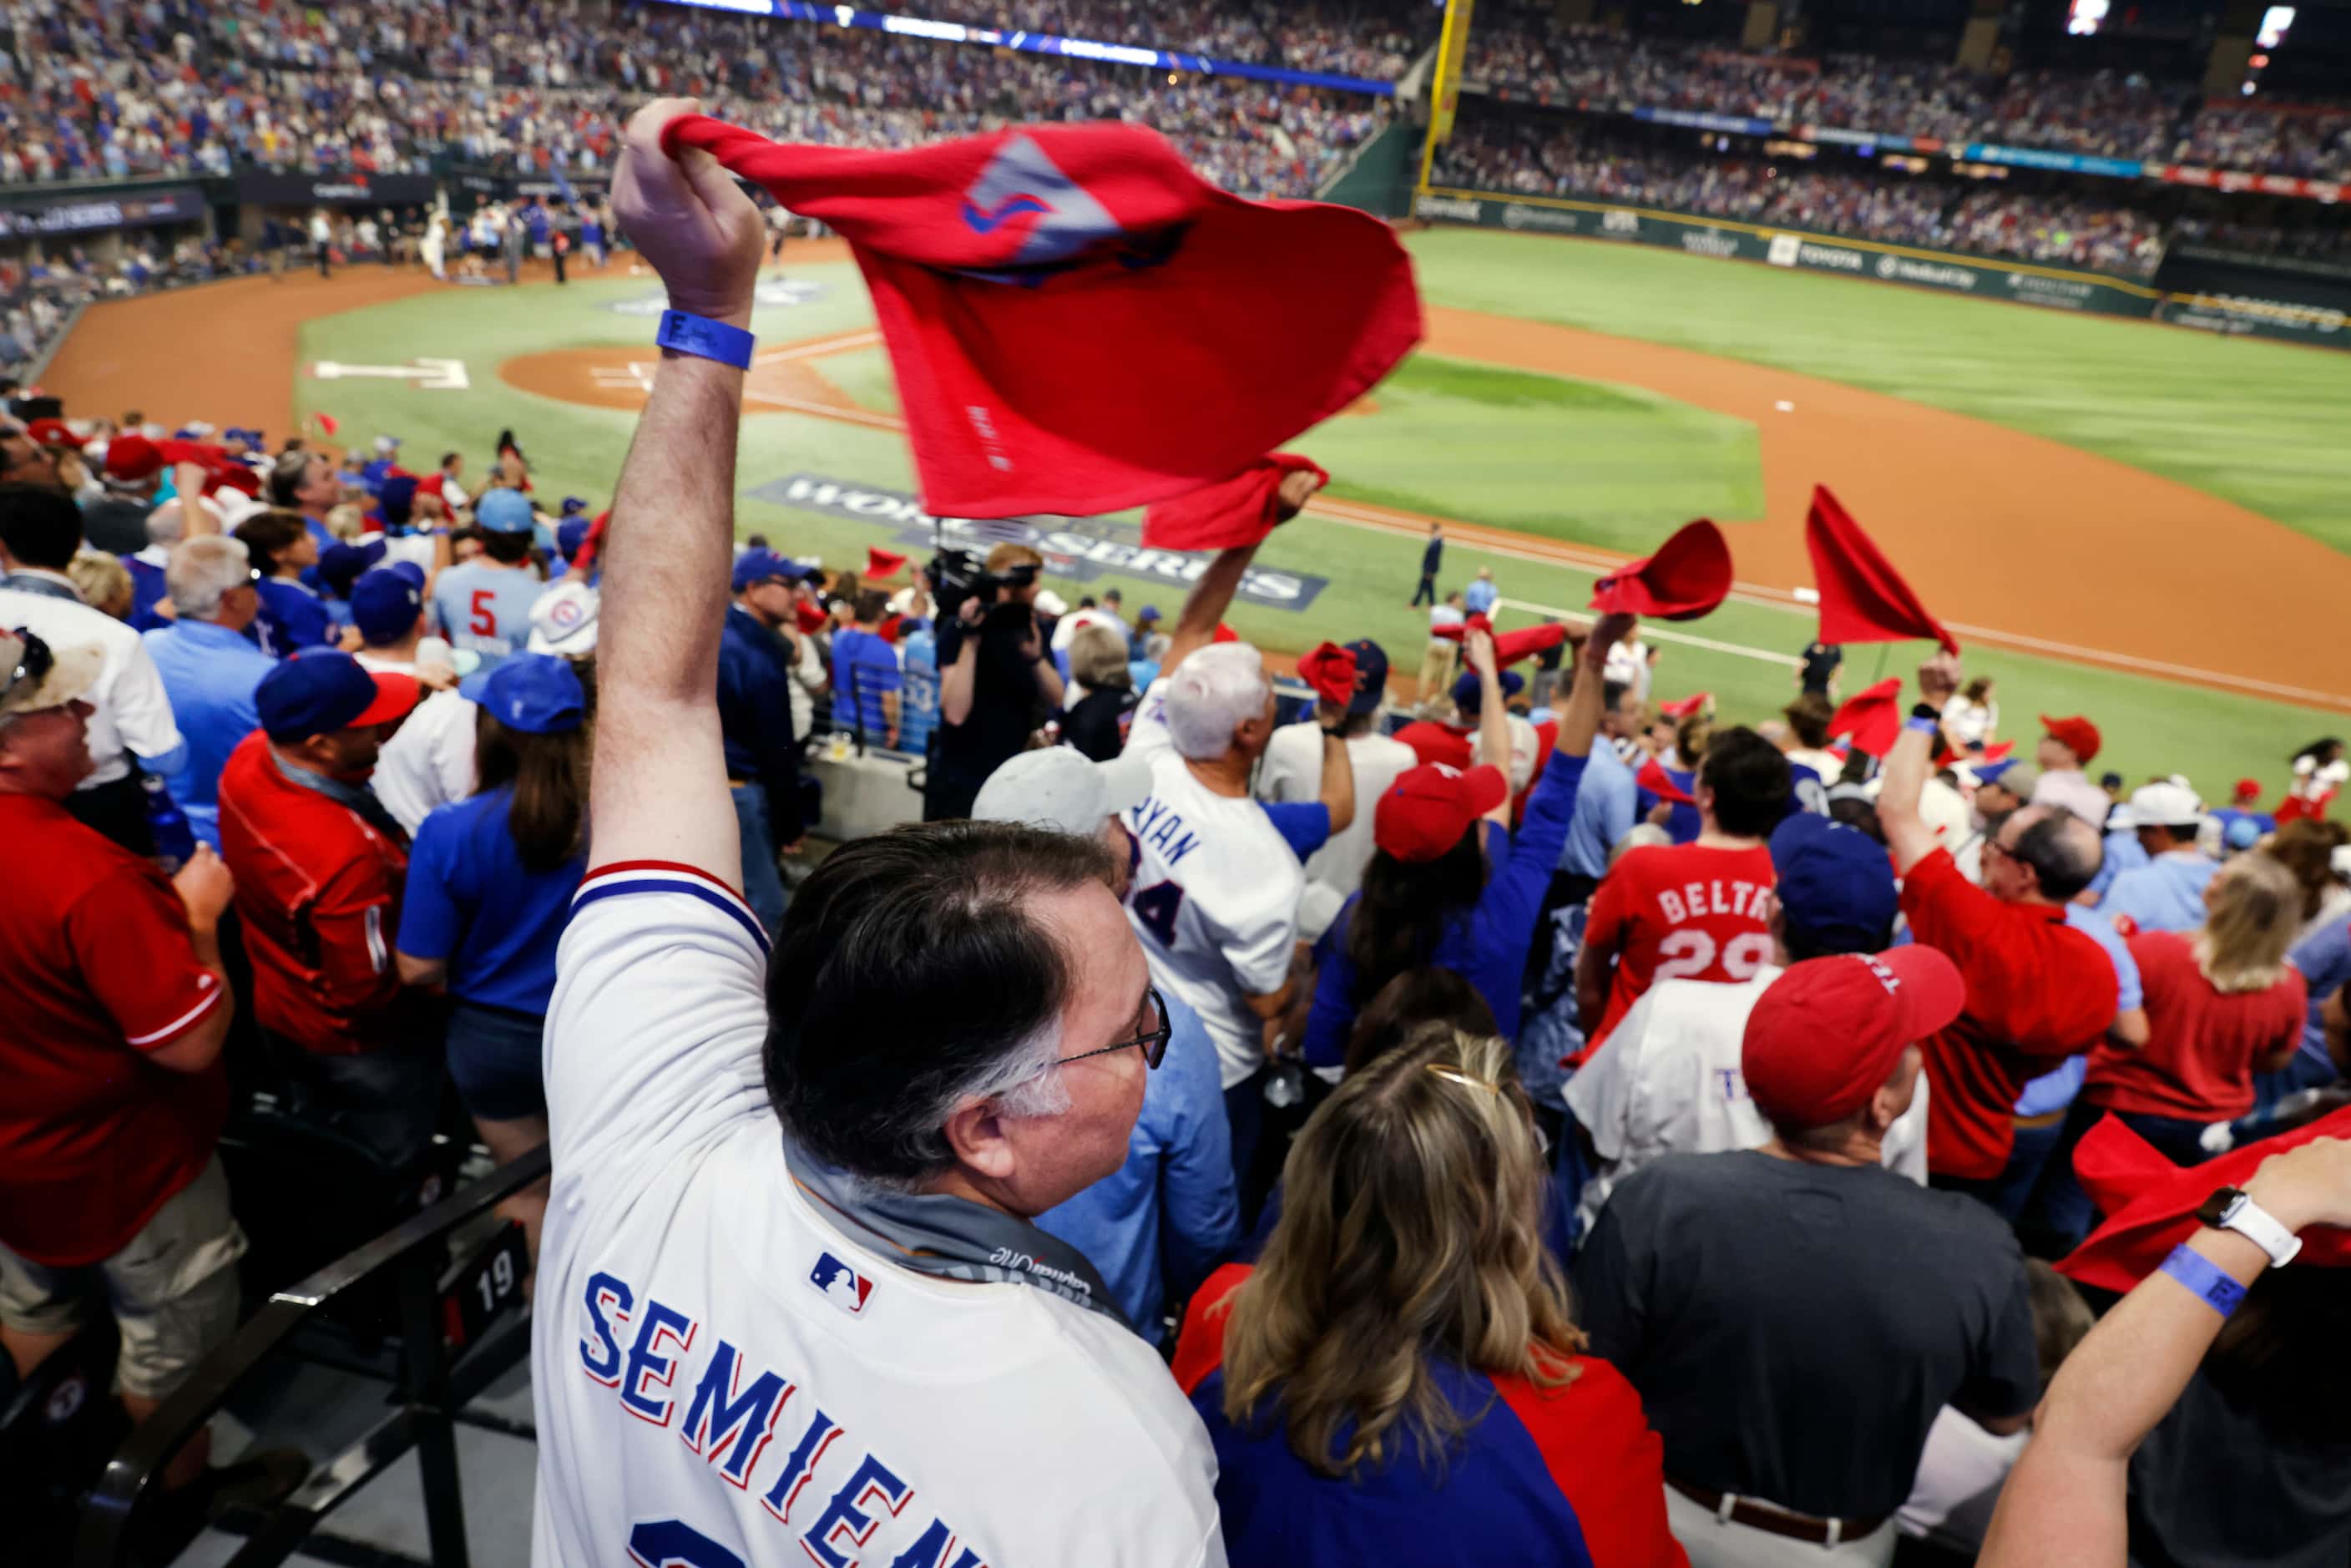 Texas Rangers fans wave their spirit towels before Game 1 of the World Series against the...